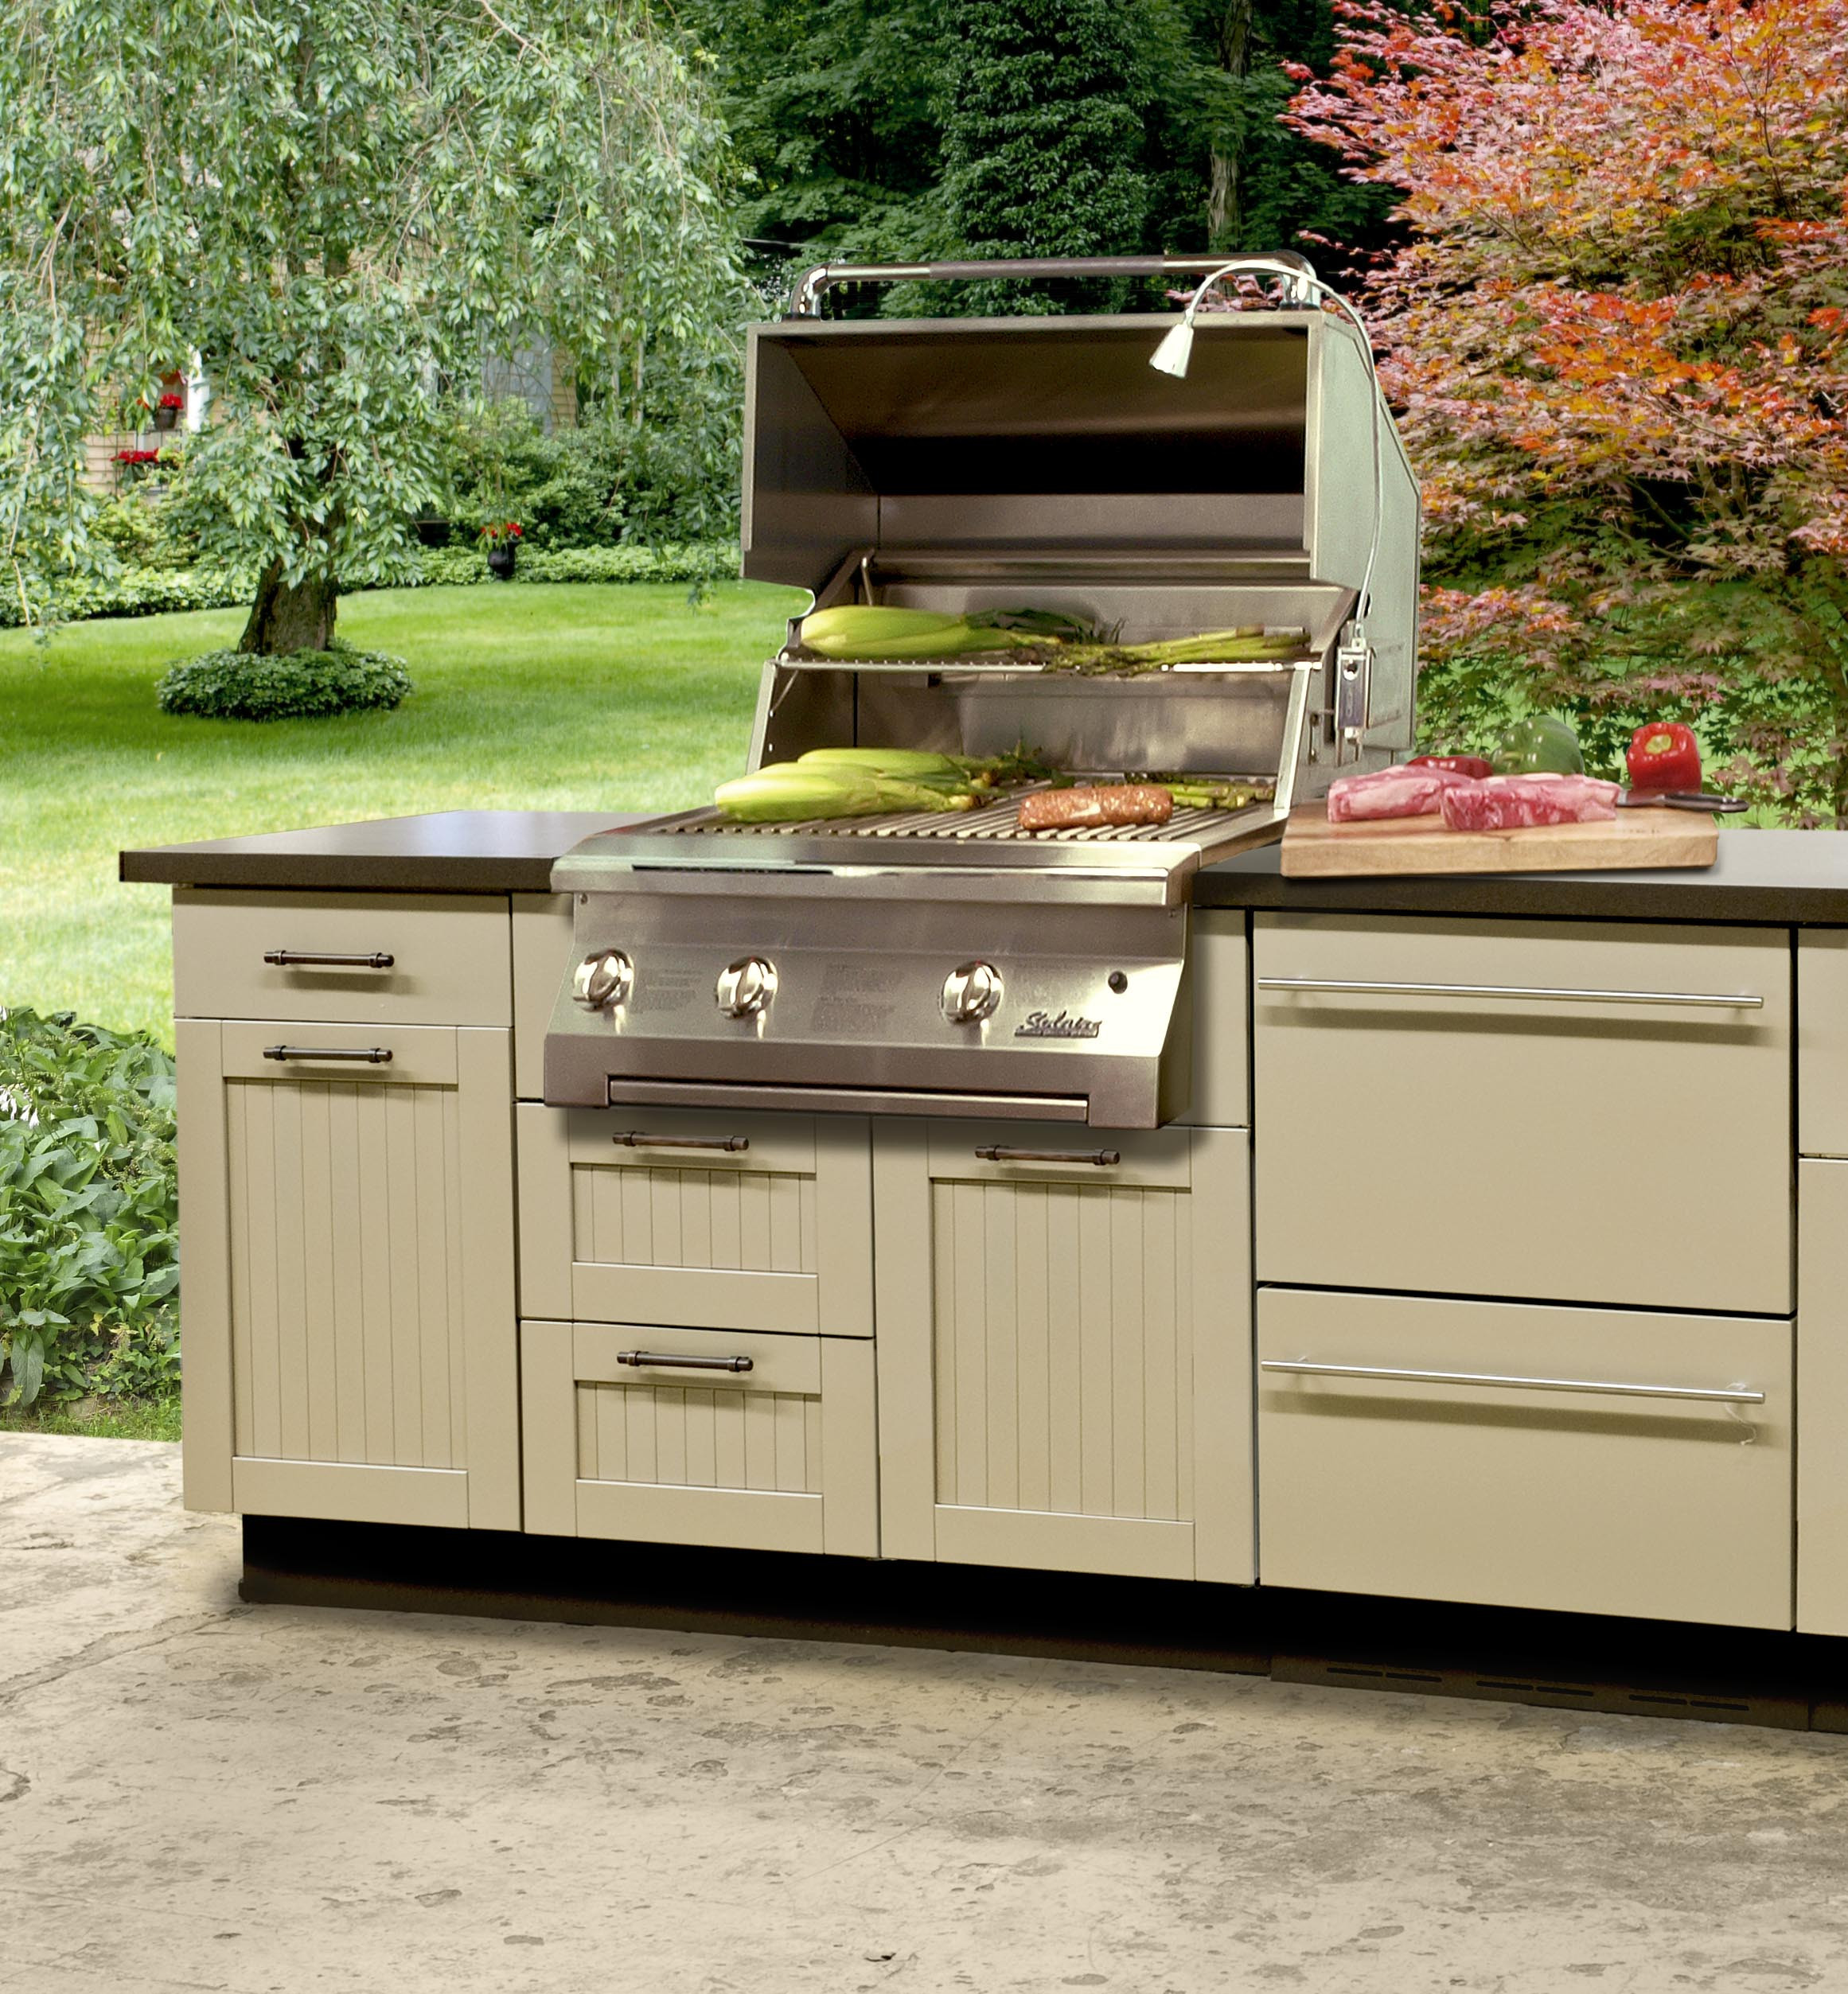 Outdoor Kitchen Kit Lowes
 Outdoor kitchen lowes best suited to offer you top notch